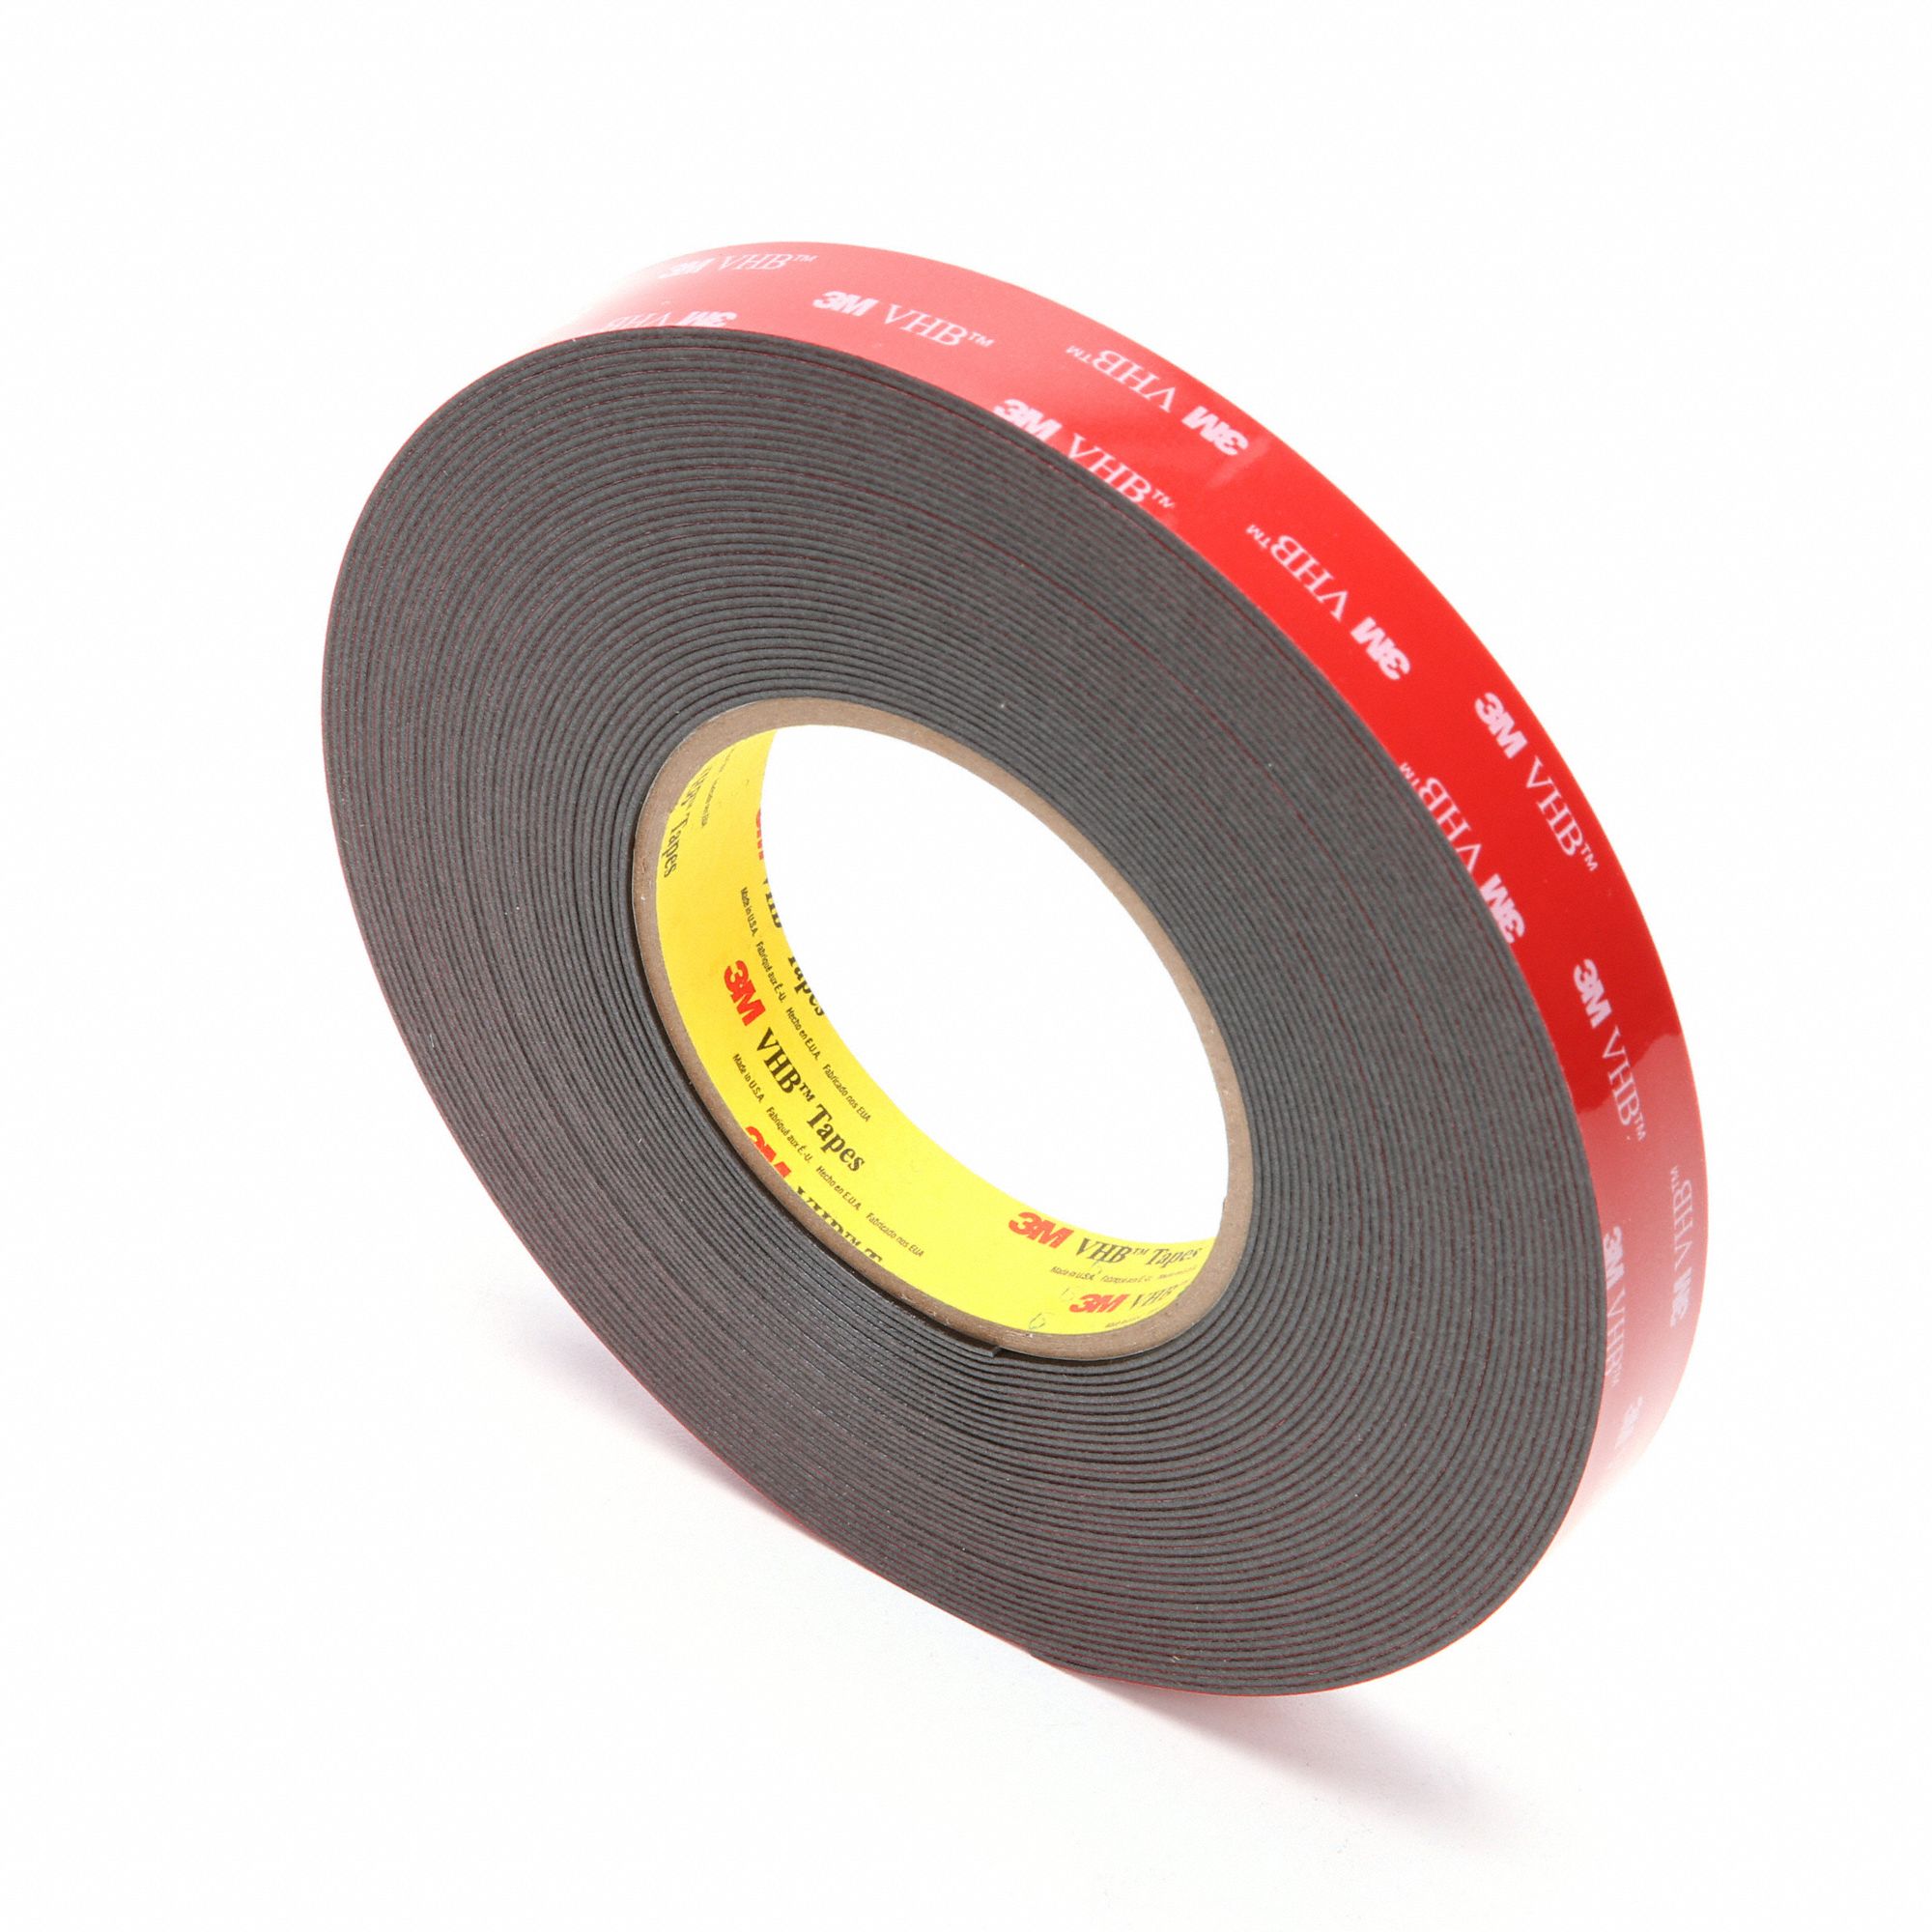 3M 2 (50mm) X 6 Ft VHB Double Sided Foam Adhesive Tape 5952 Grey